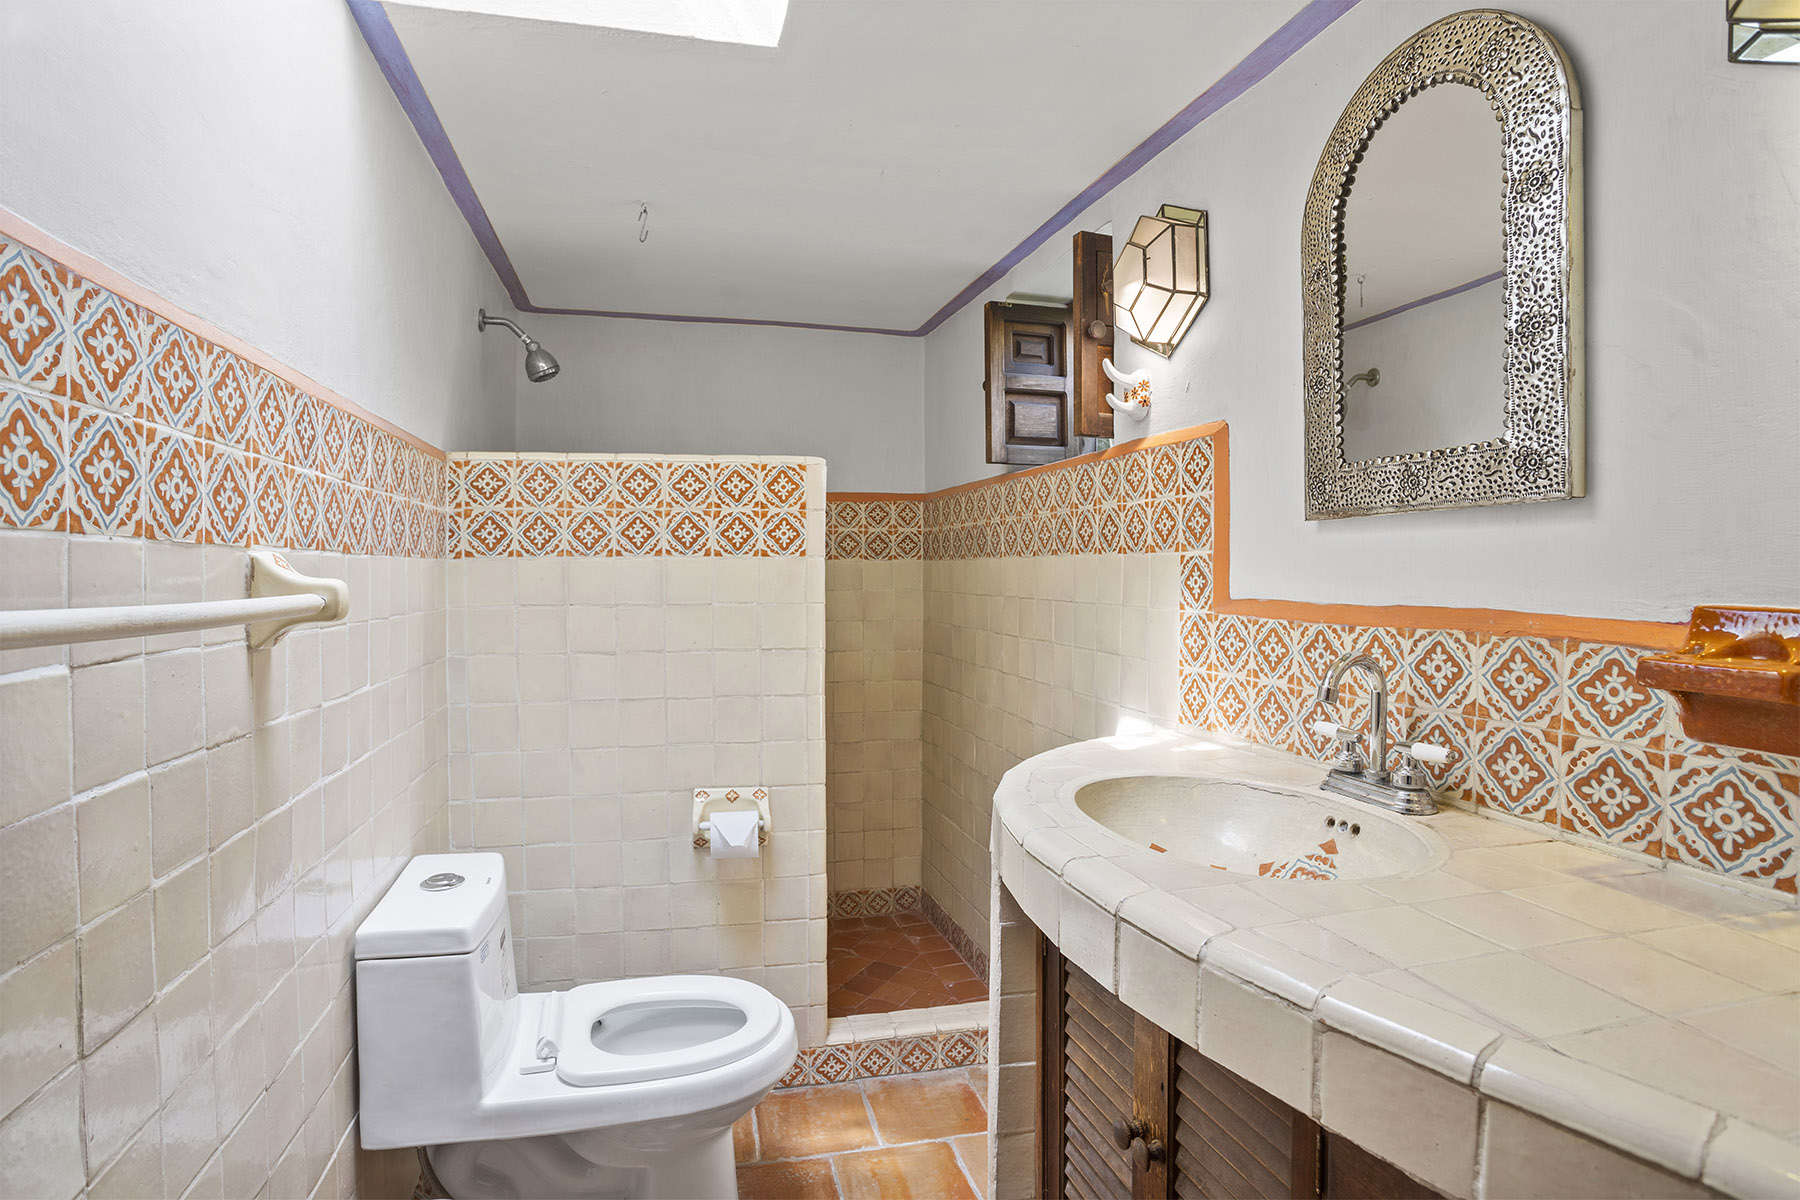 17 Full Bath with Colorful Mexican Tile